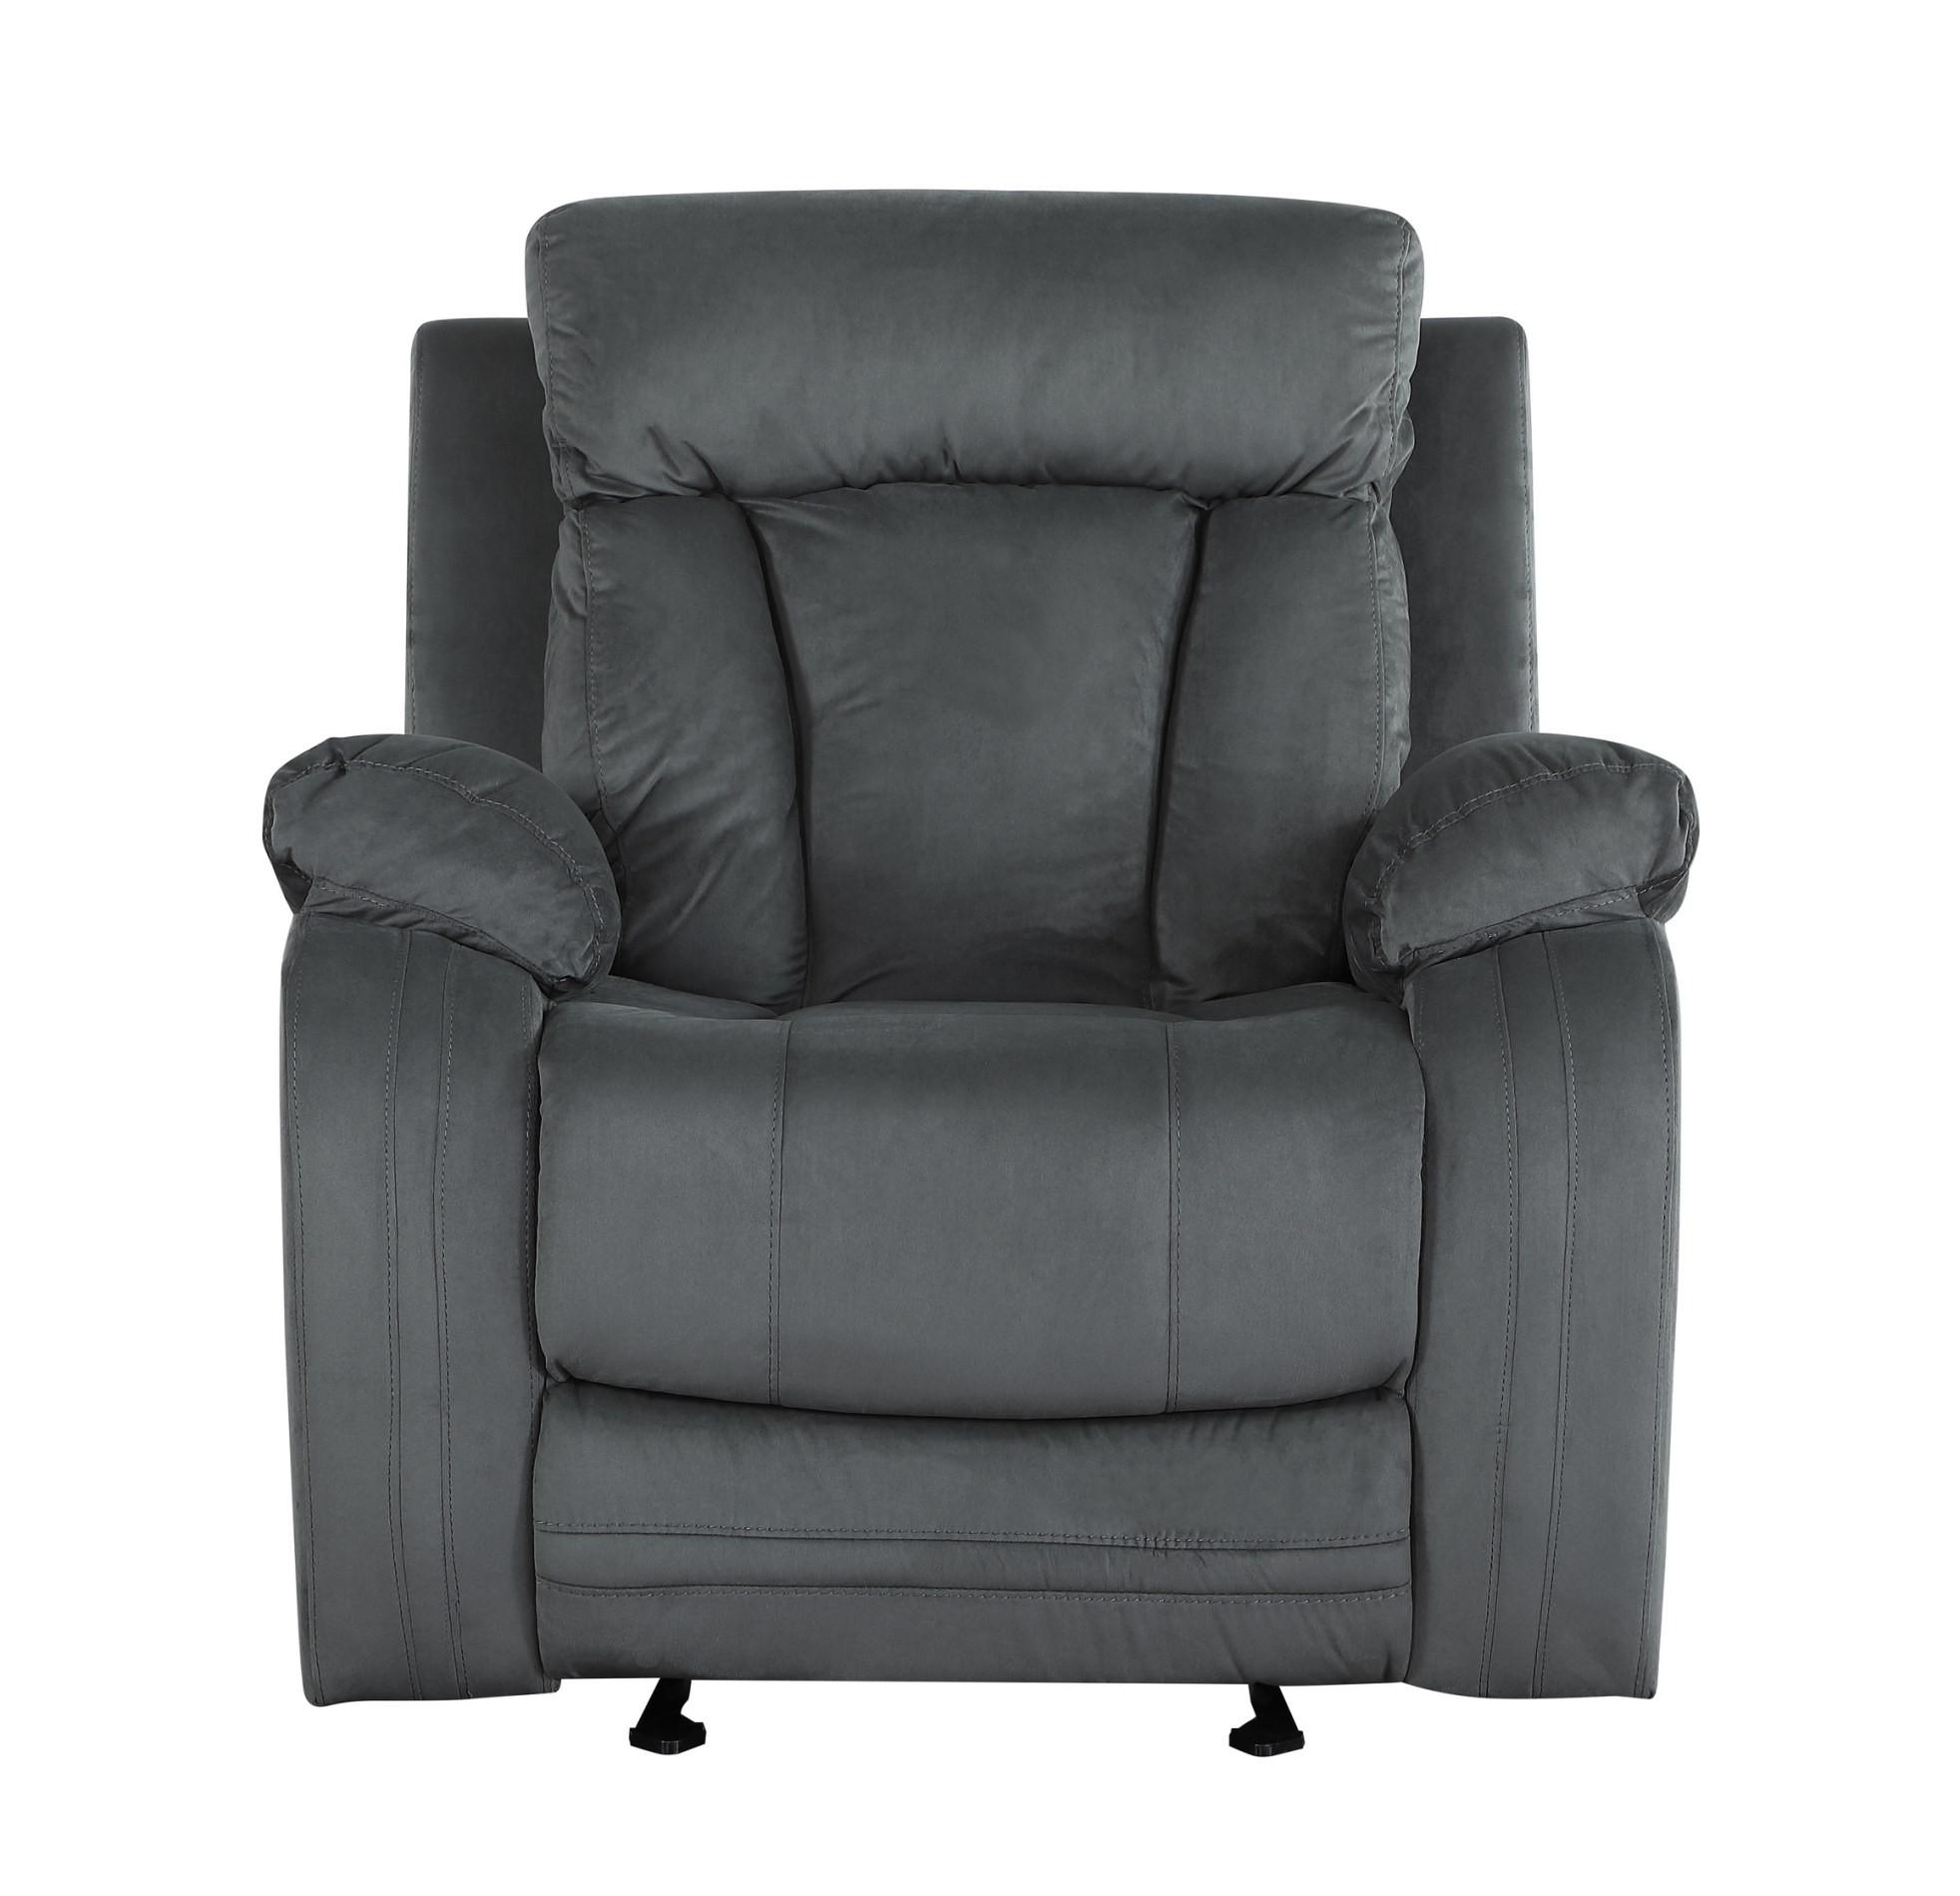 

    
Contemporary Gray Microfiber Recliner Chair Global United 9760
